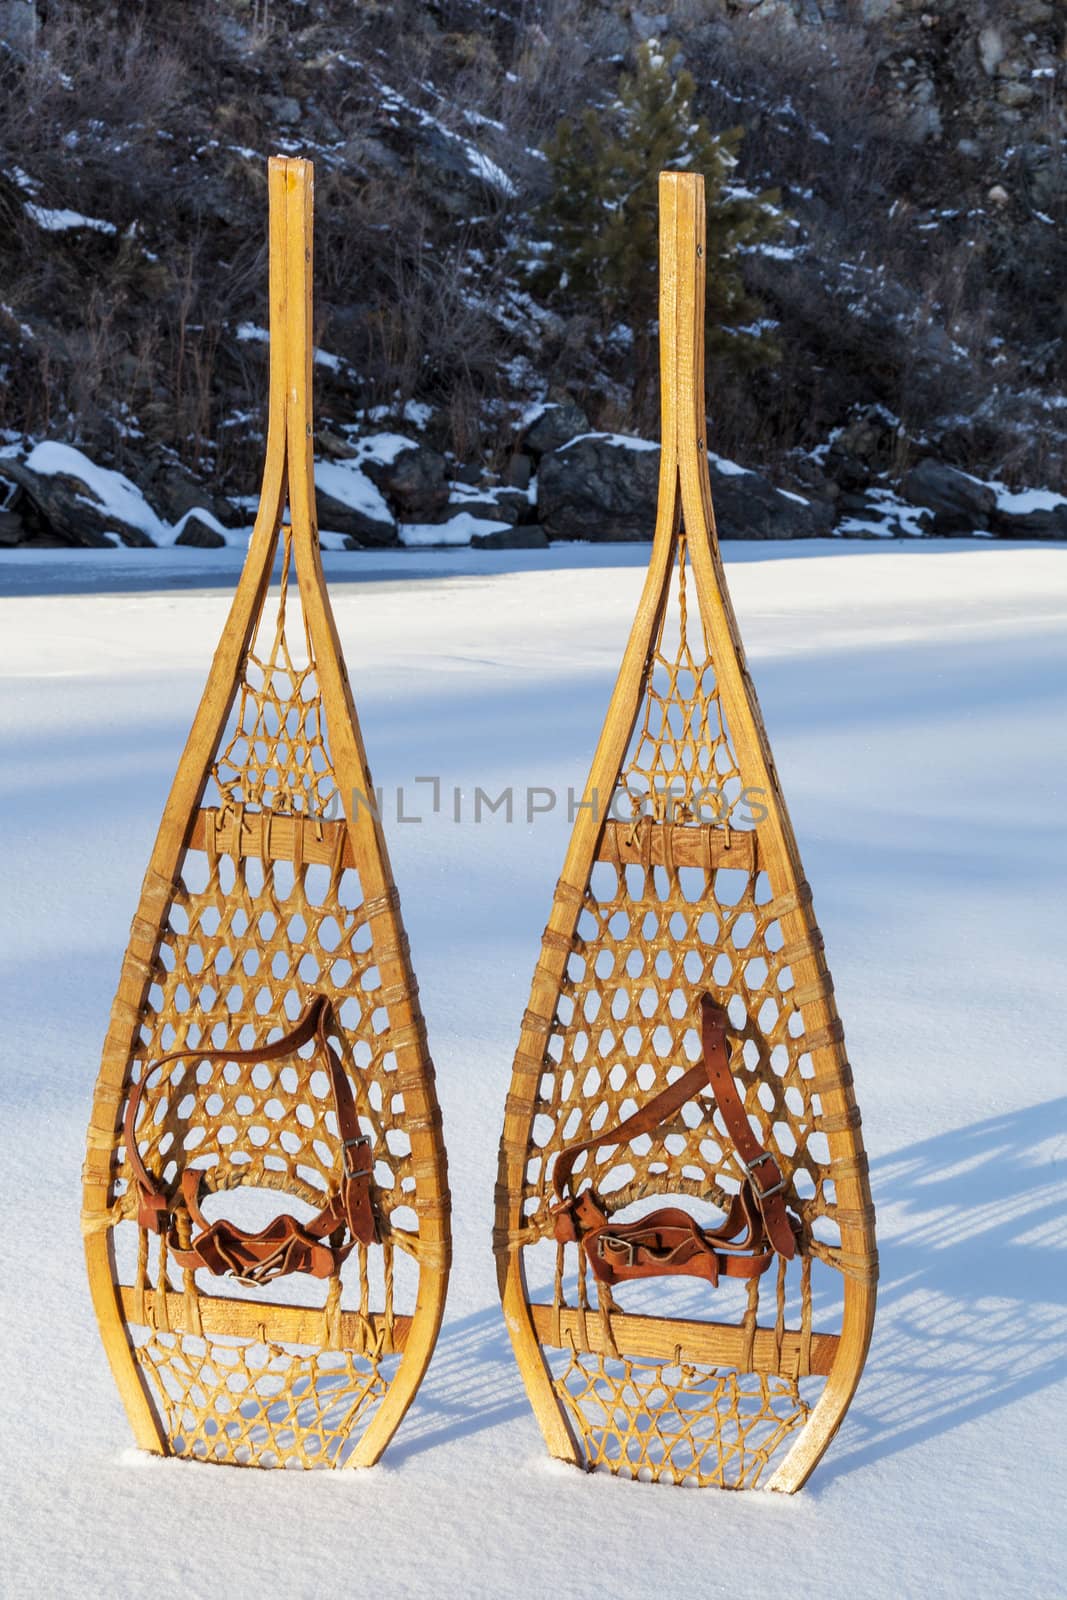 vintage wooden Huron snowshoes with leather binding in snow